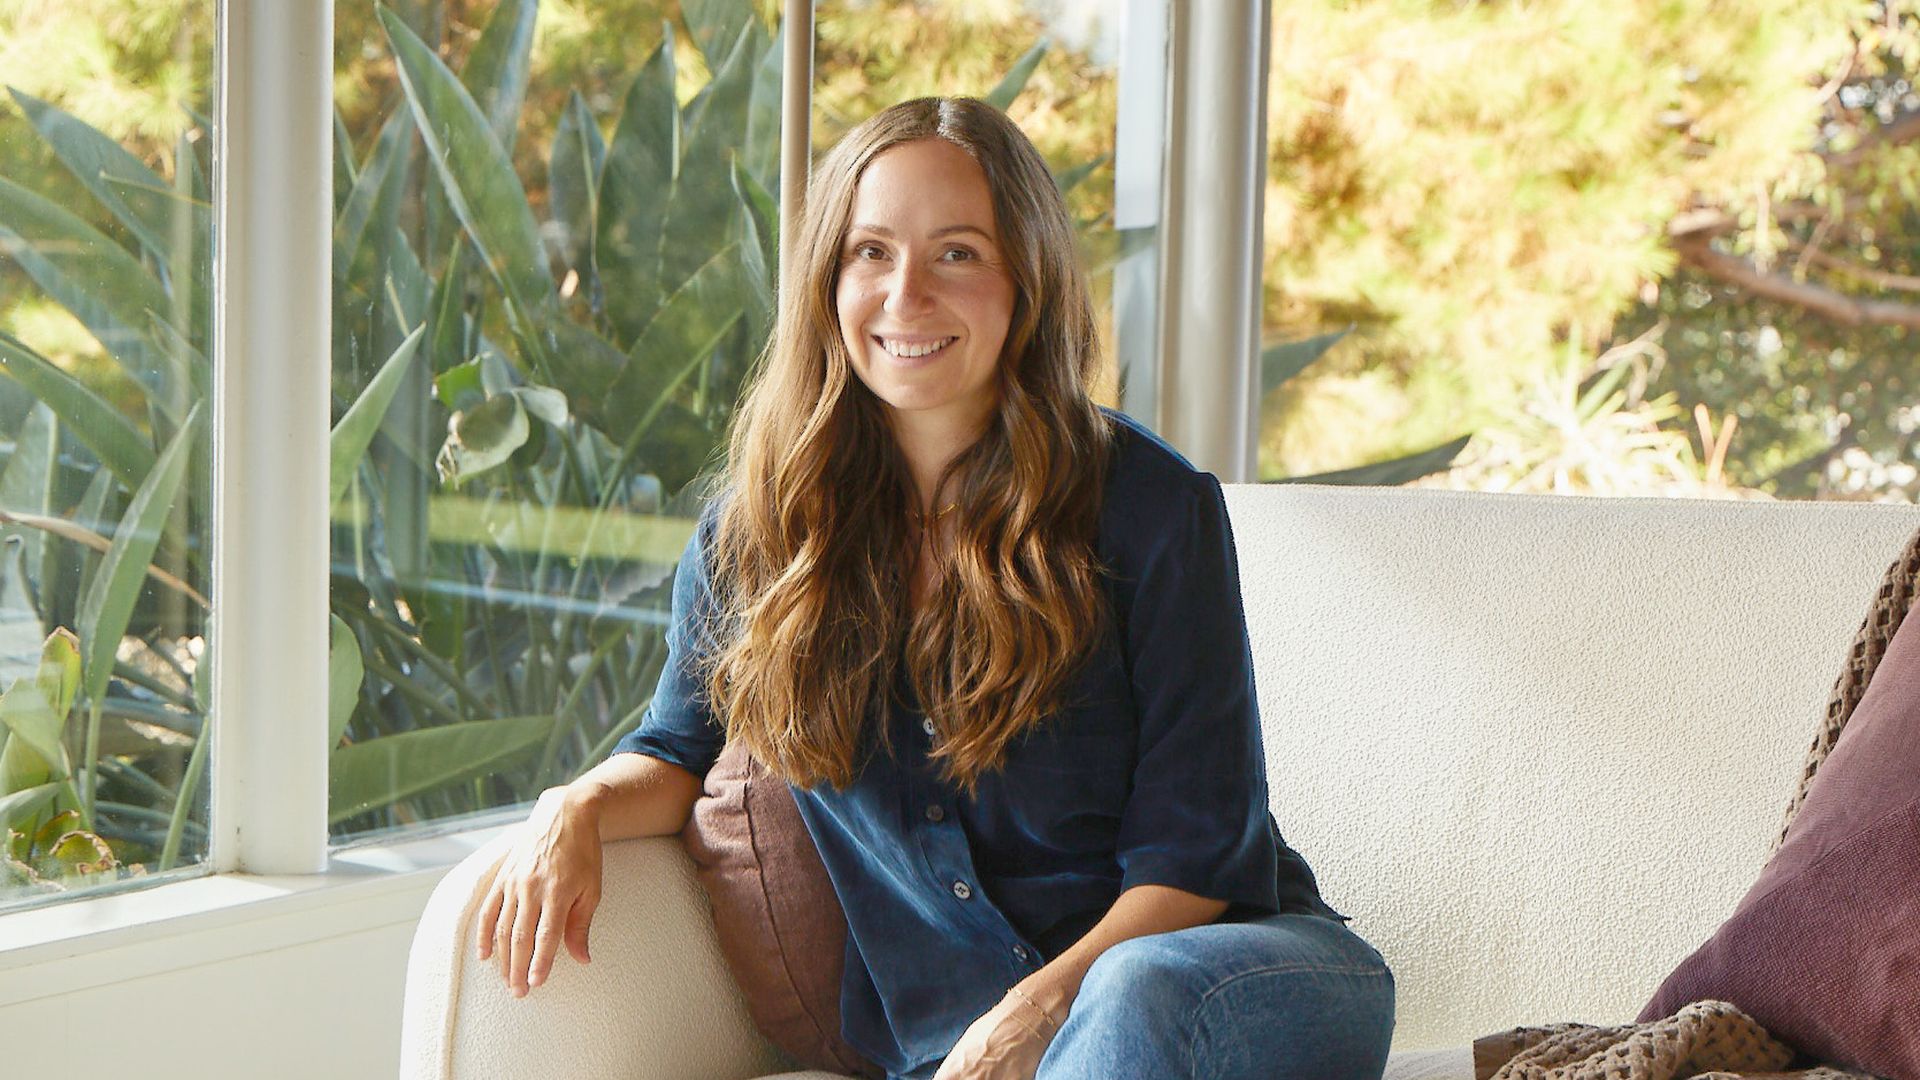 Ariel Kaye, the CEO and founder of Parachute, sits on a white sofa in a living room with floor to ceiling windows.